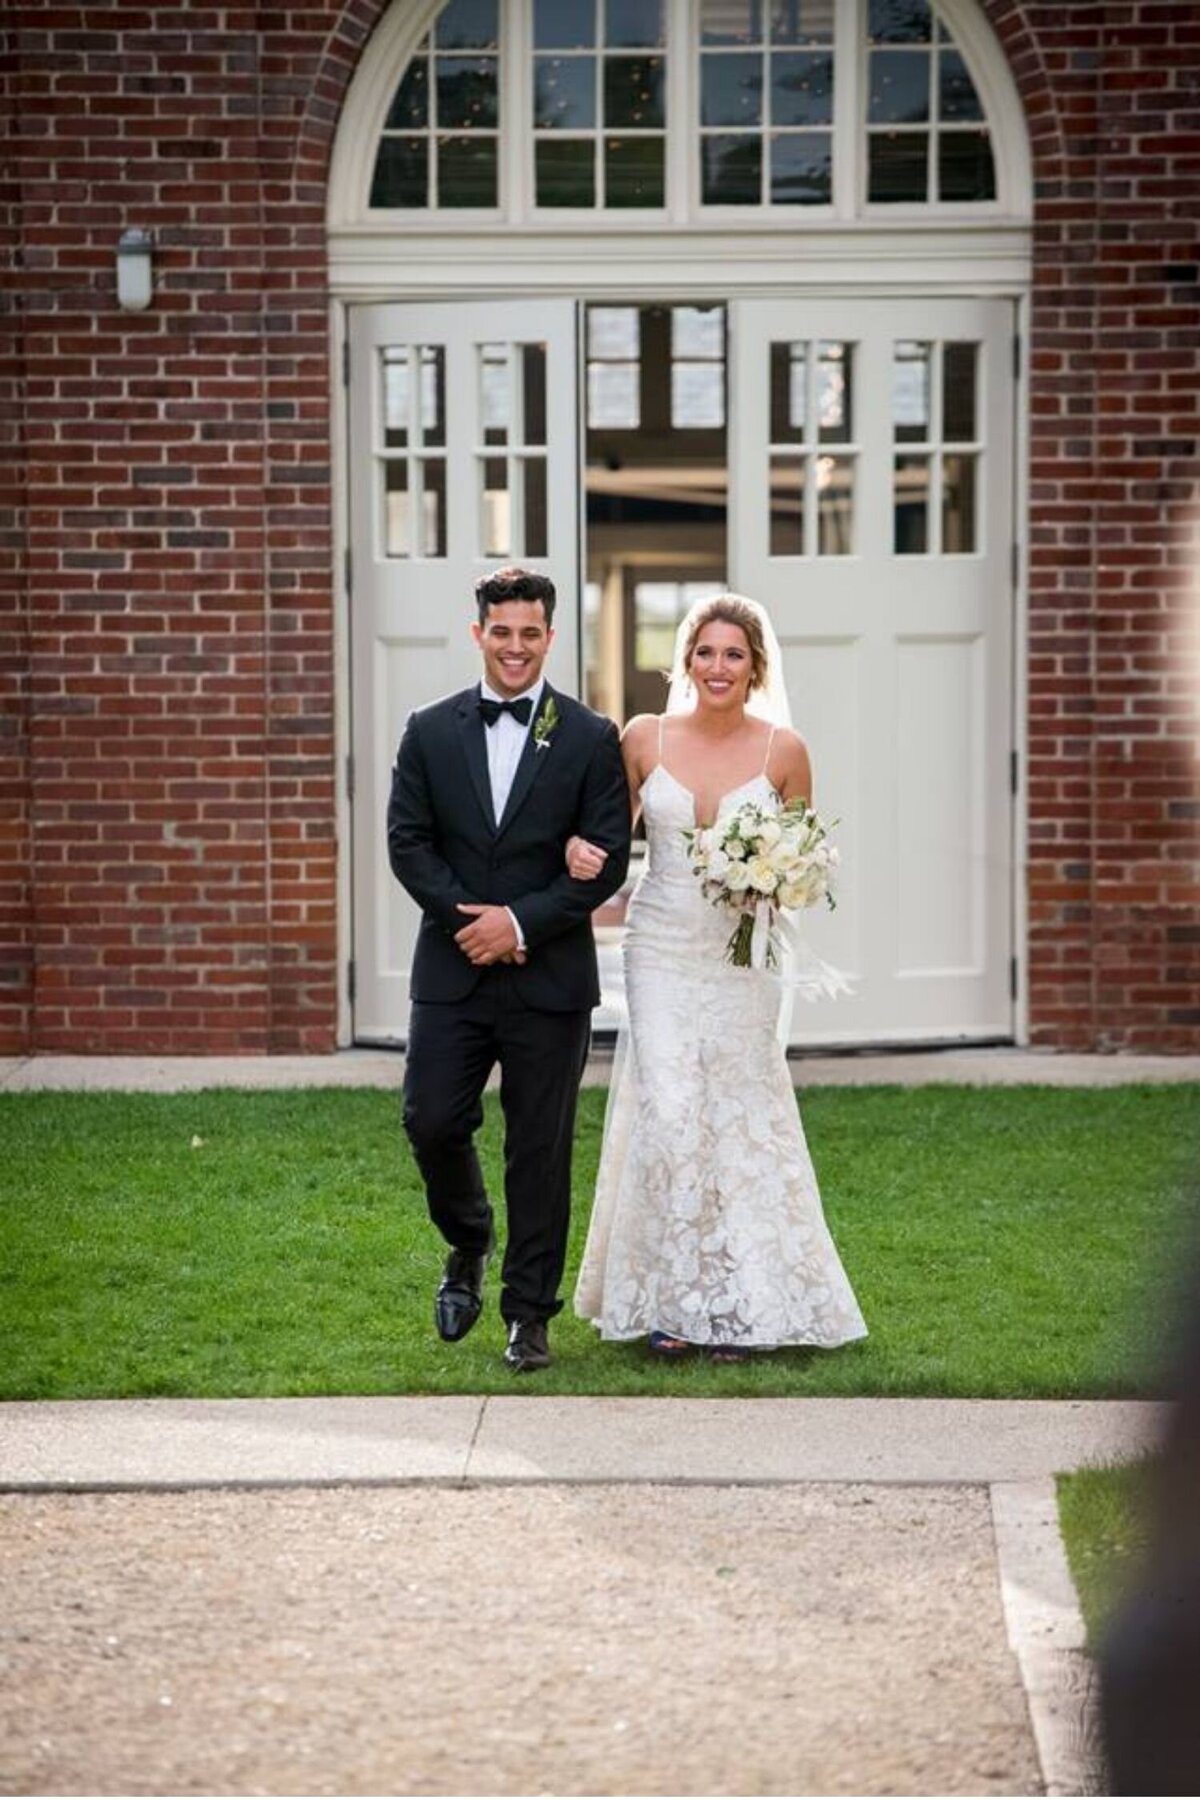 Brother walks sister down the aisle during an outdoor ceremony at a luxury Italian inspired Chicago North Shore wedding.